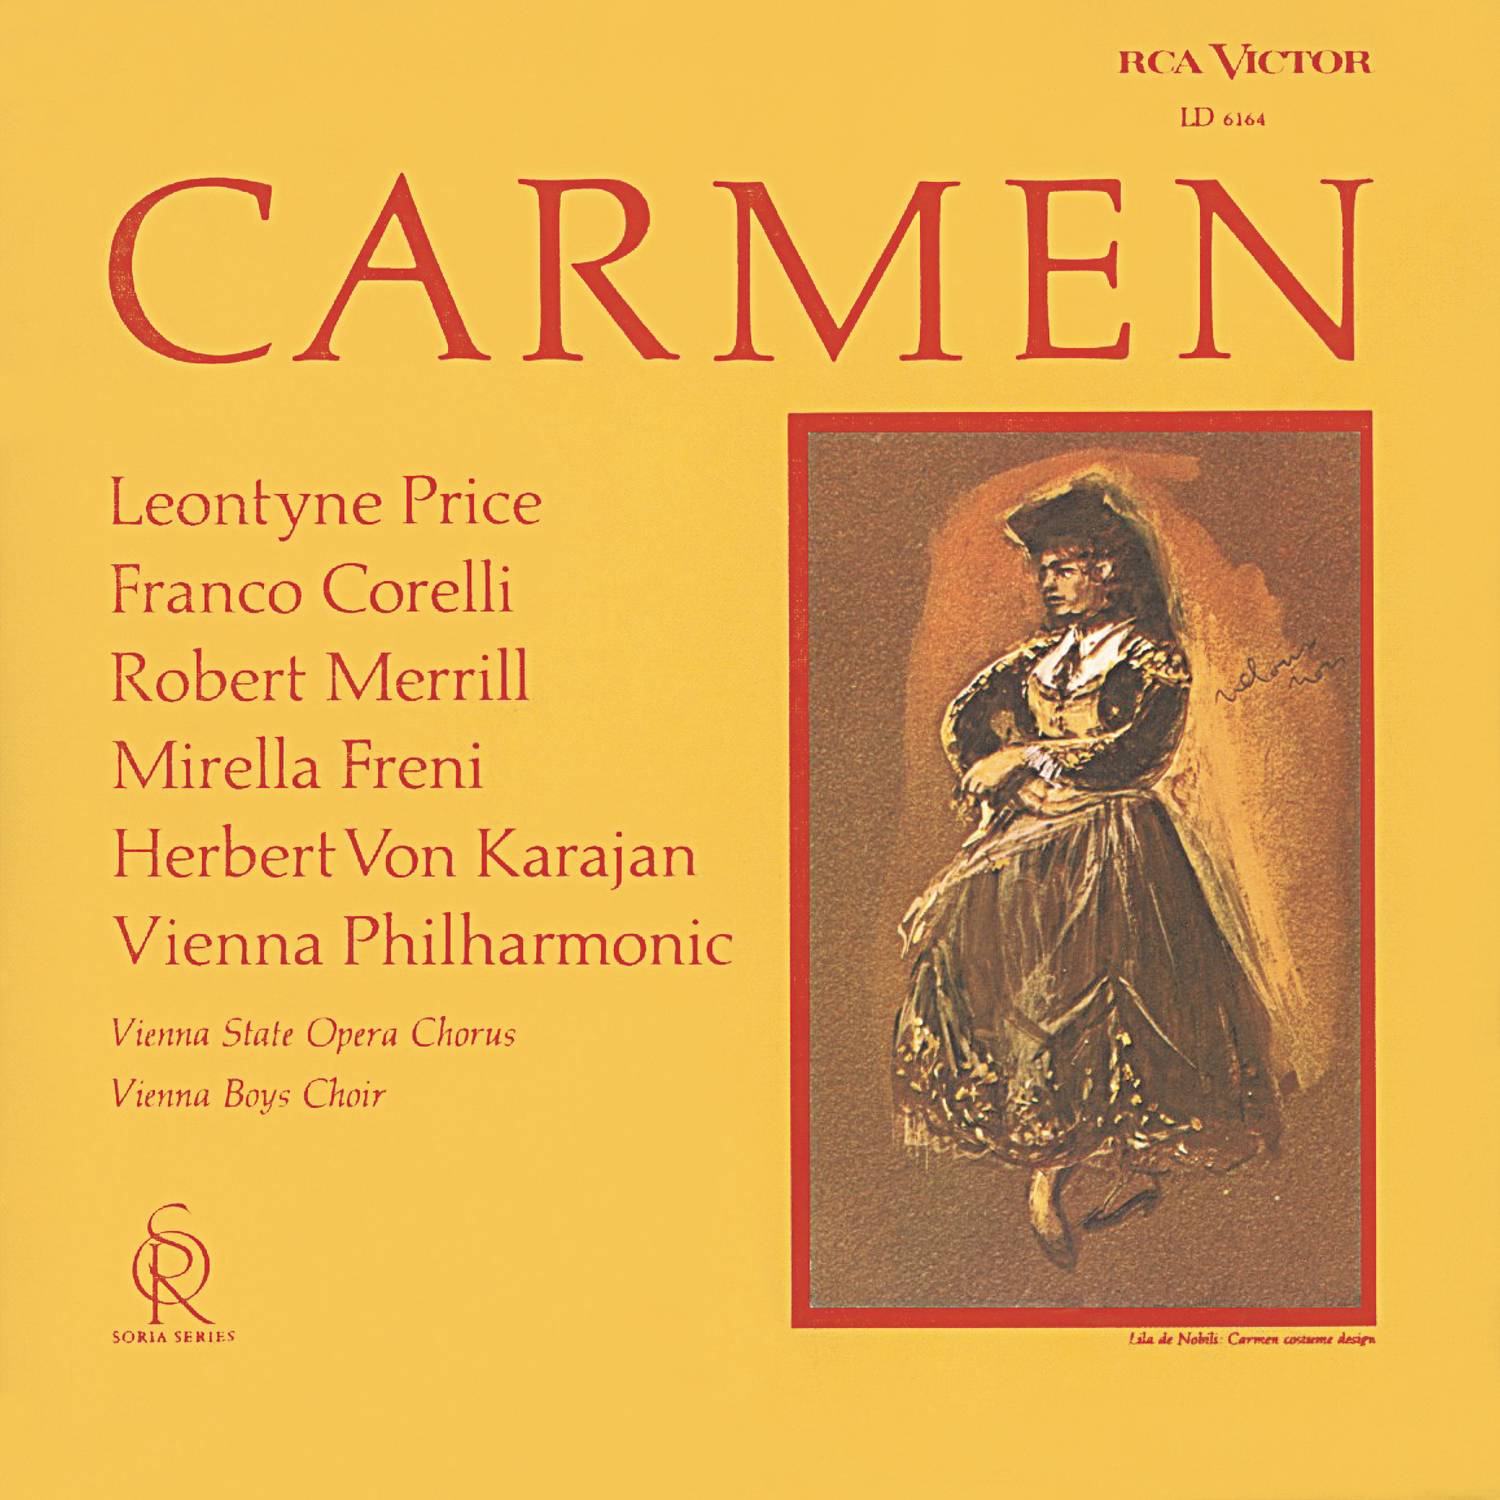 Carmen (Remastered): Act II - Les tringles des sistres tintaient (Gypsy Song) (2008 SACD Remastered)